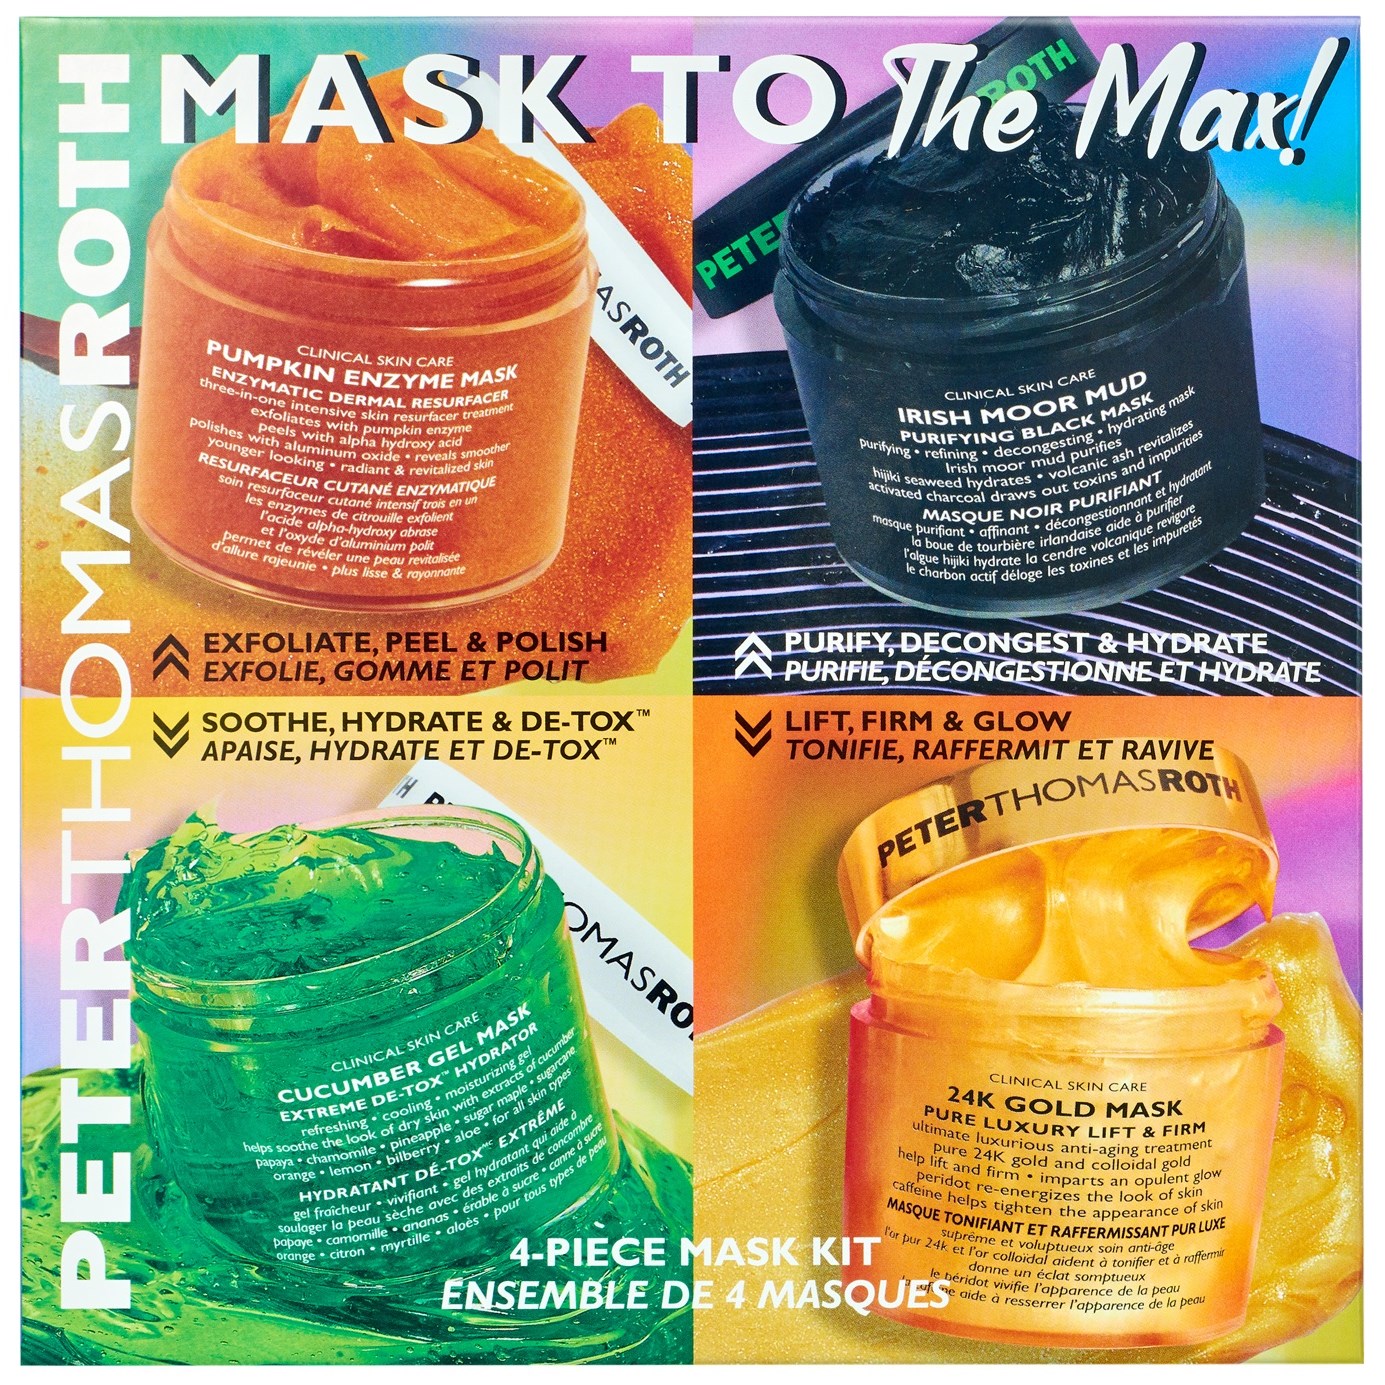 Peter Thomas Roth Mask to the Max! 4-piece Mask Kit